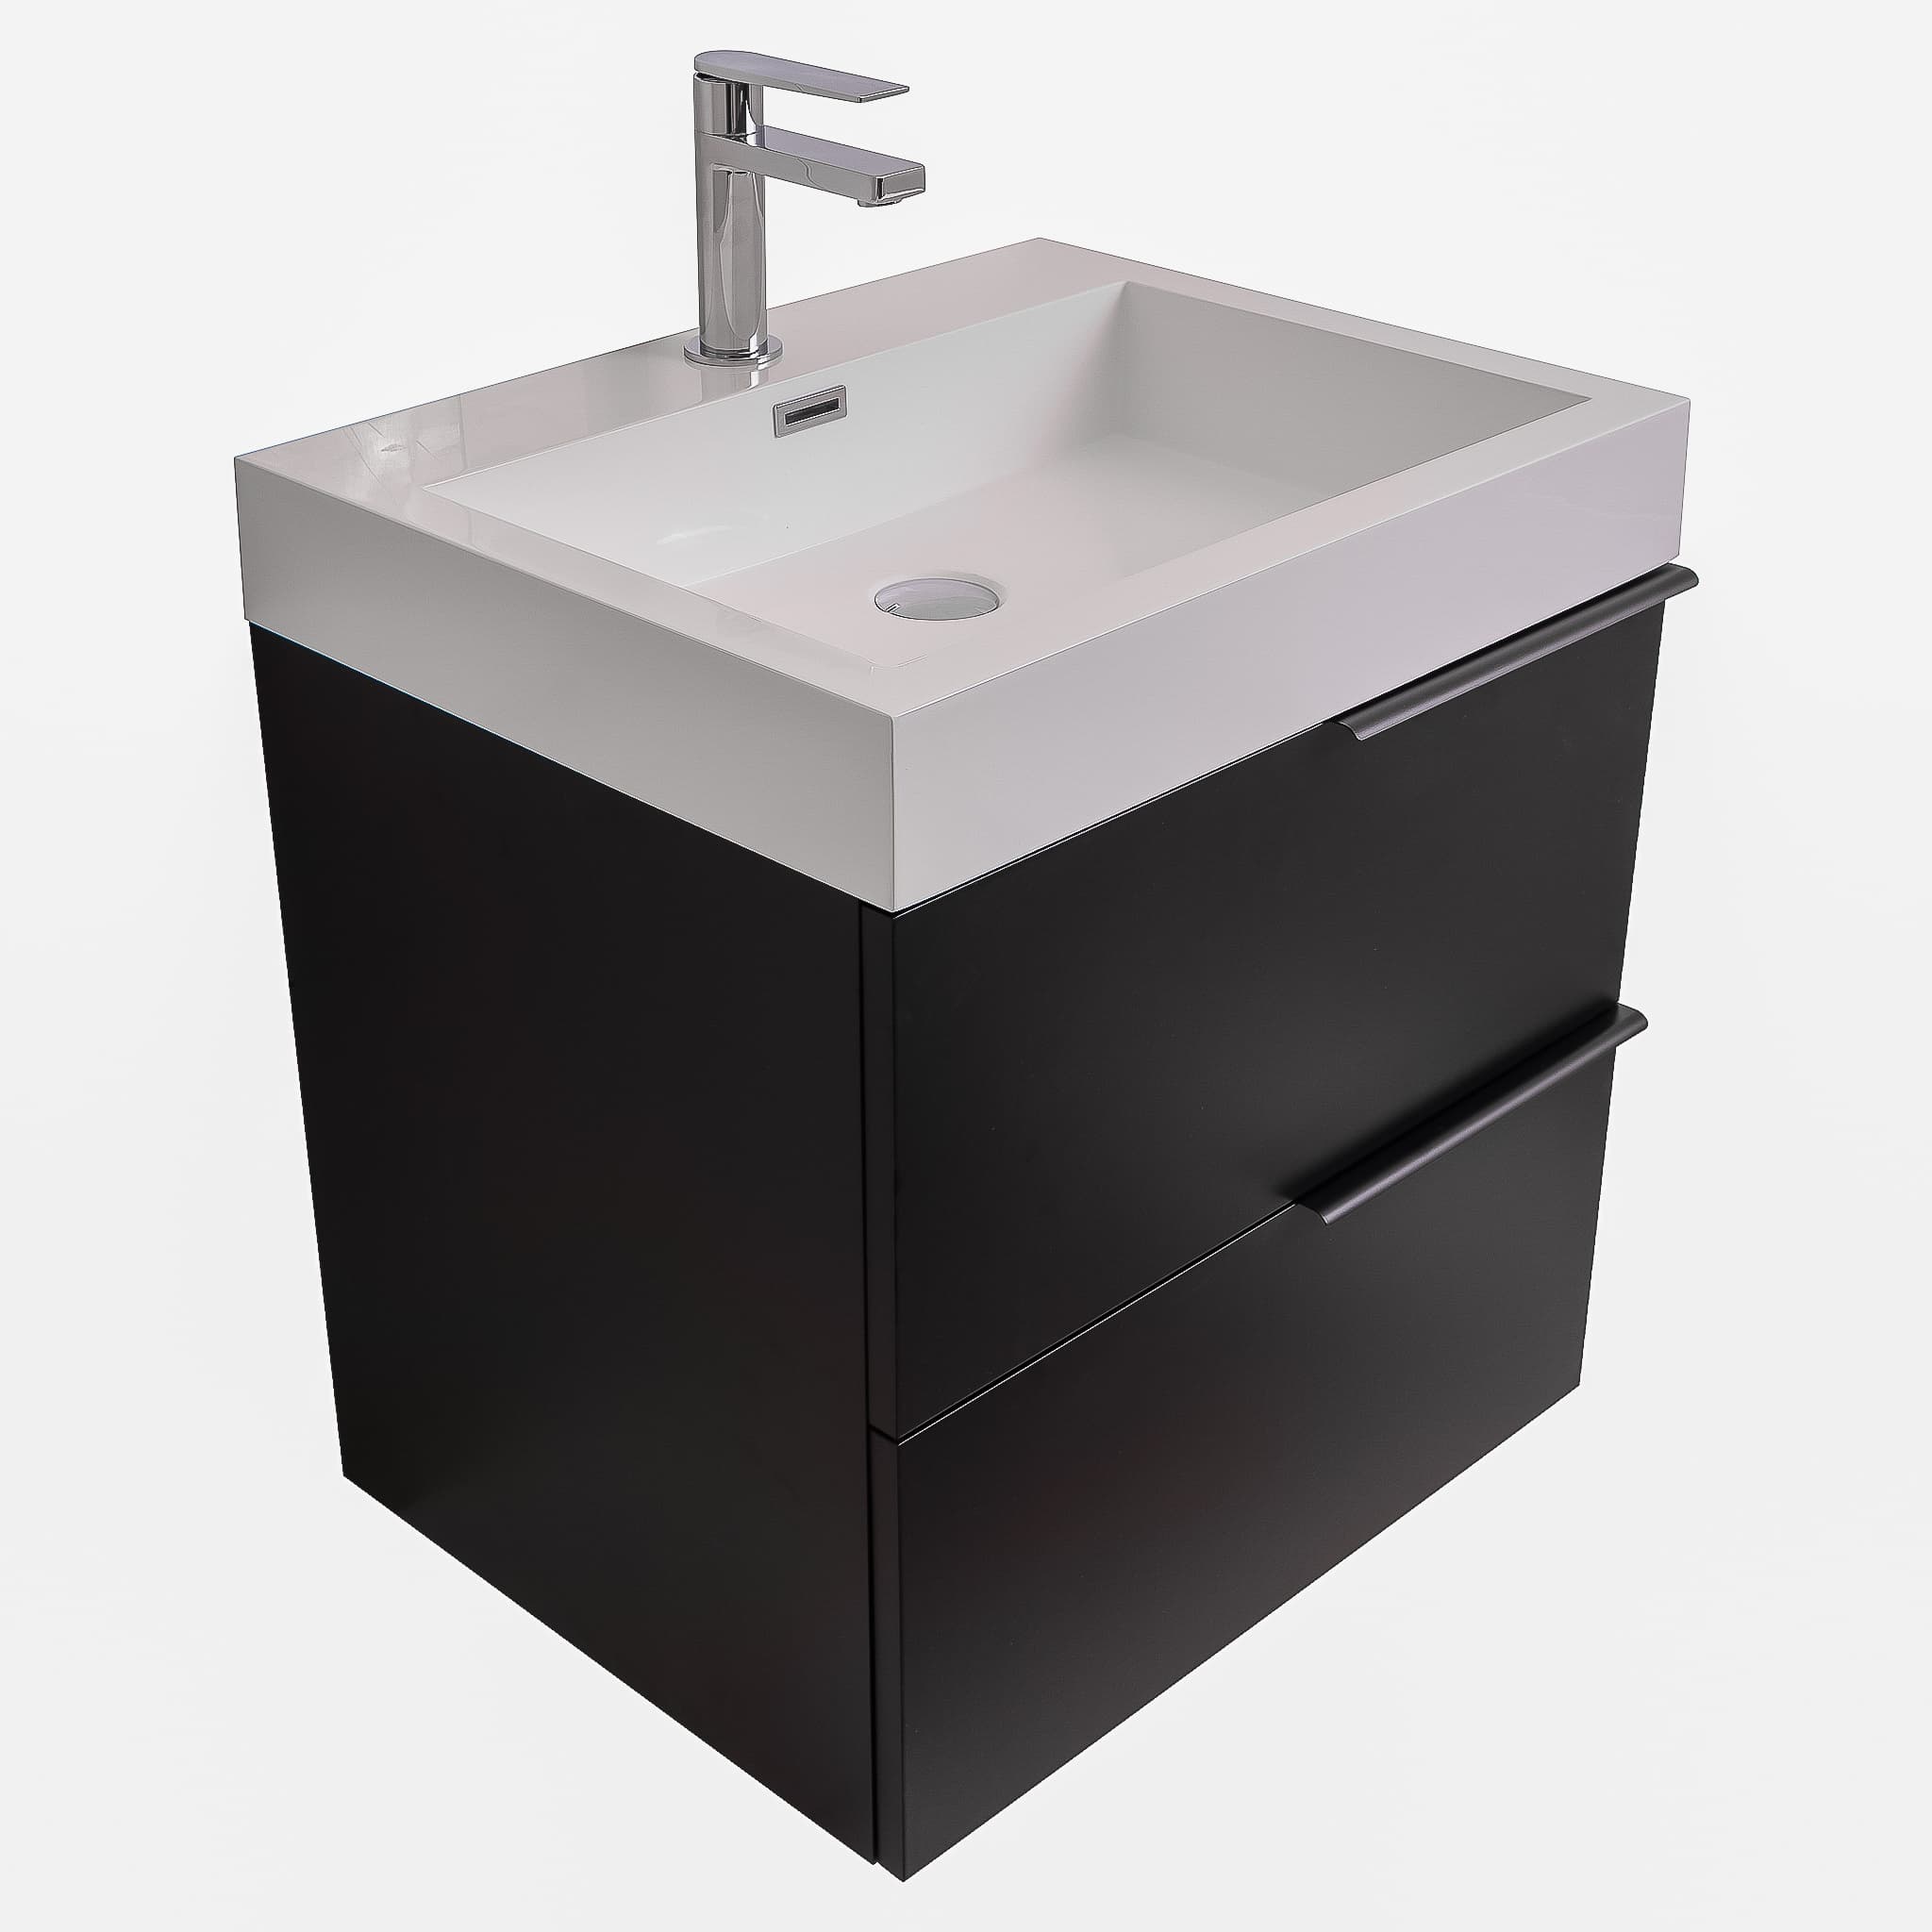 Mallorca 23.5 Matte Black Cabinet, Square Cultured Marble Sink, Wall Mounted Modern Vanity Set